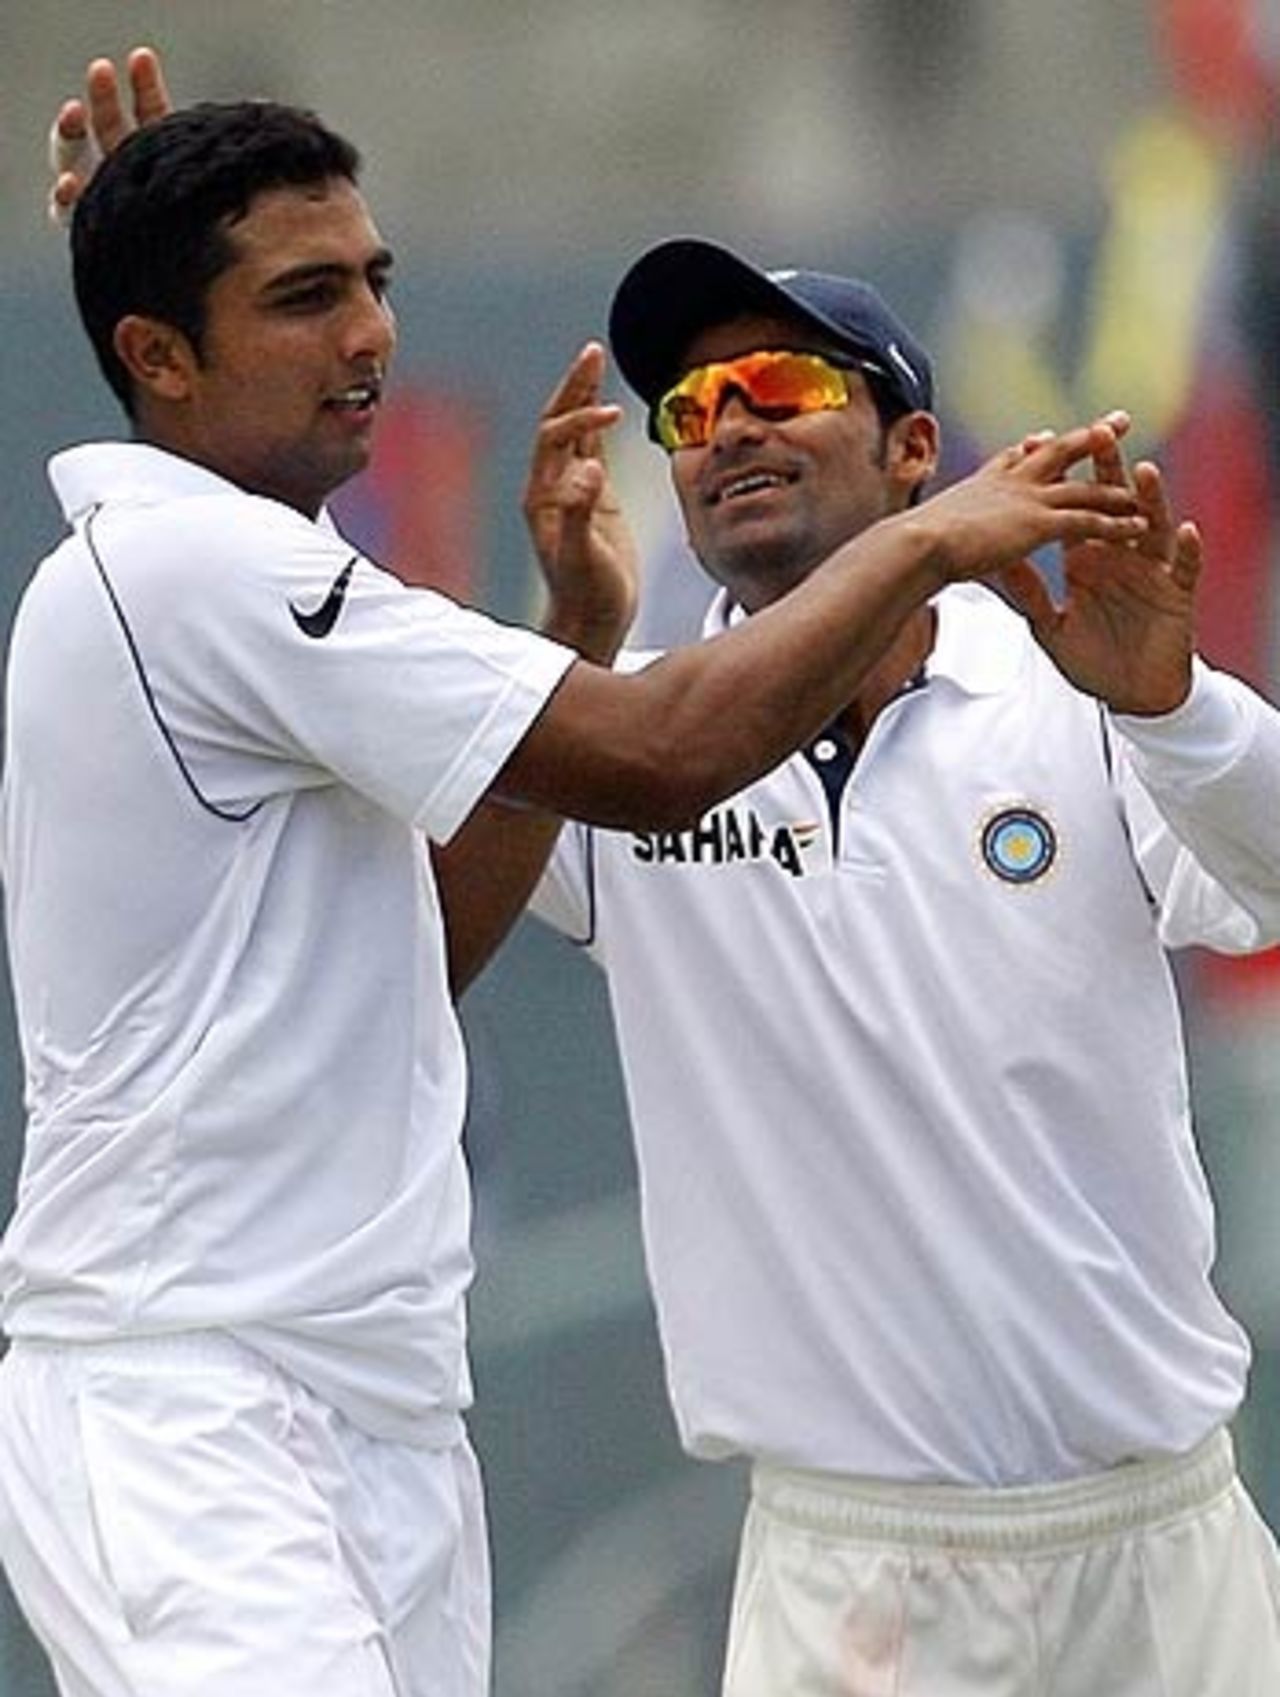 Mohammad Kaif congratulates VRV Singh on his first Test wicket, West Indies v India, 1st Test, Antigua, 3rd day, June 4, 2006